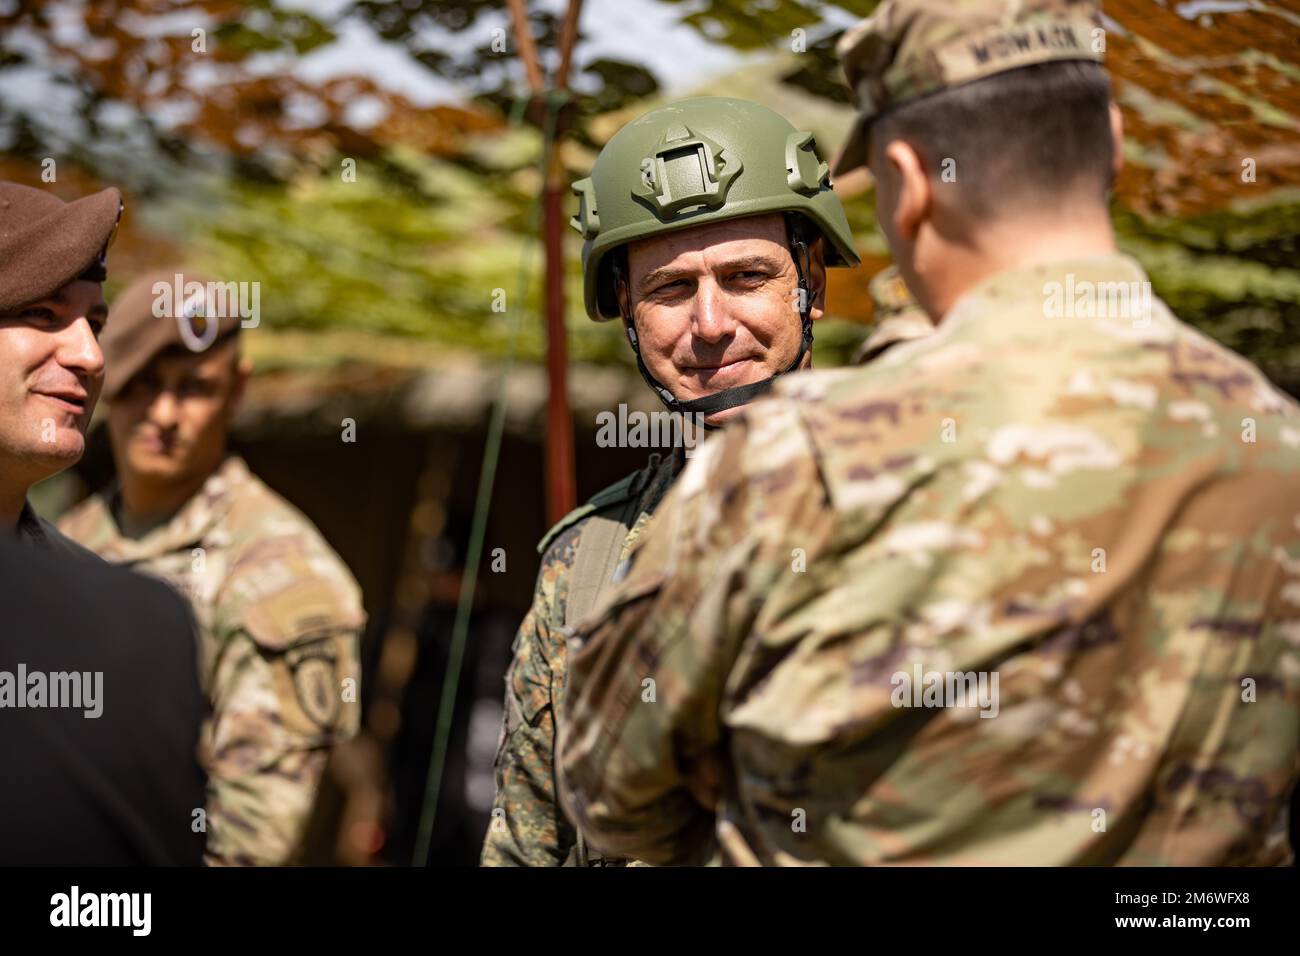 U.S. Army Brig. Gen. David Womack, incoming Fifth Corps deputy commanding general of maneuver, talks to Bulgarian Land Forces Lt. Col. Velin Kohayev, commander of 42nd Mechanized Battalion, during a Bulgaria Armed Forces Day celebration, at Novo Selo Training Area, Bulgaria, May 6, 2022. V Corps, America's Forward Deployed Corps in Europe, works alongside NATO Allies and regional security partners, like Bulgaria, to provide combat-ready forces, execute joint and multinational training exercises, and retain command and control for all rotational and assigned units in the European theater. Stock Photo